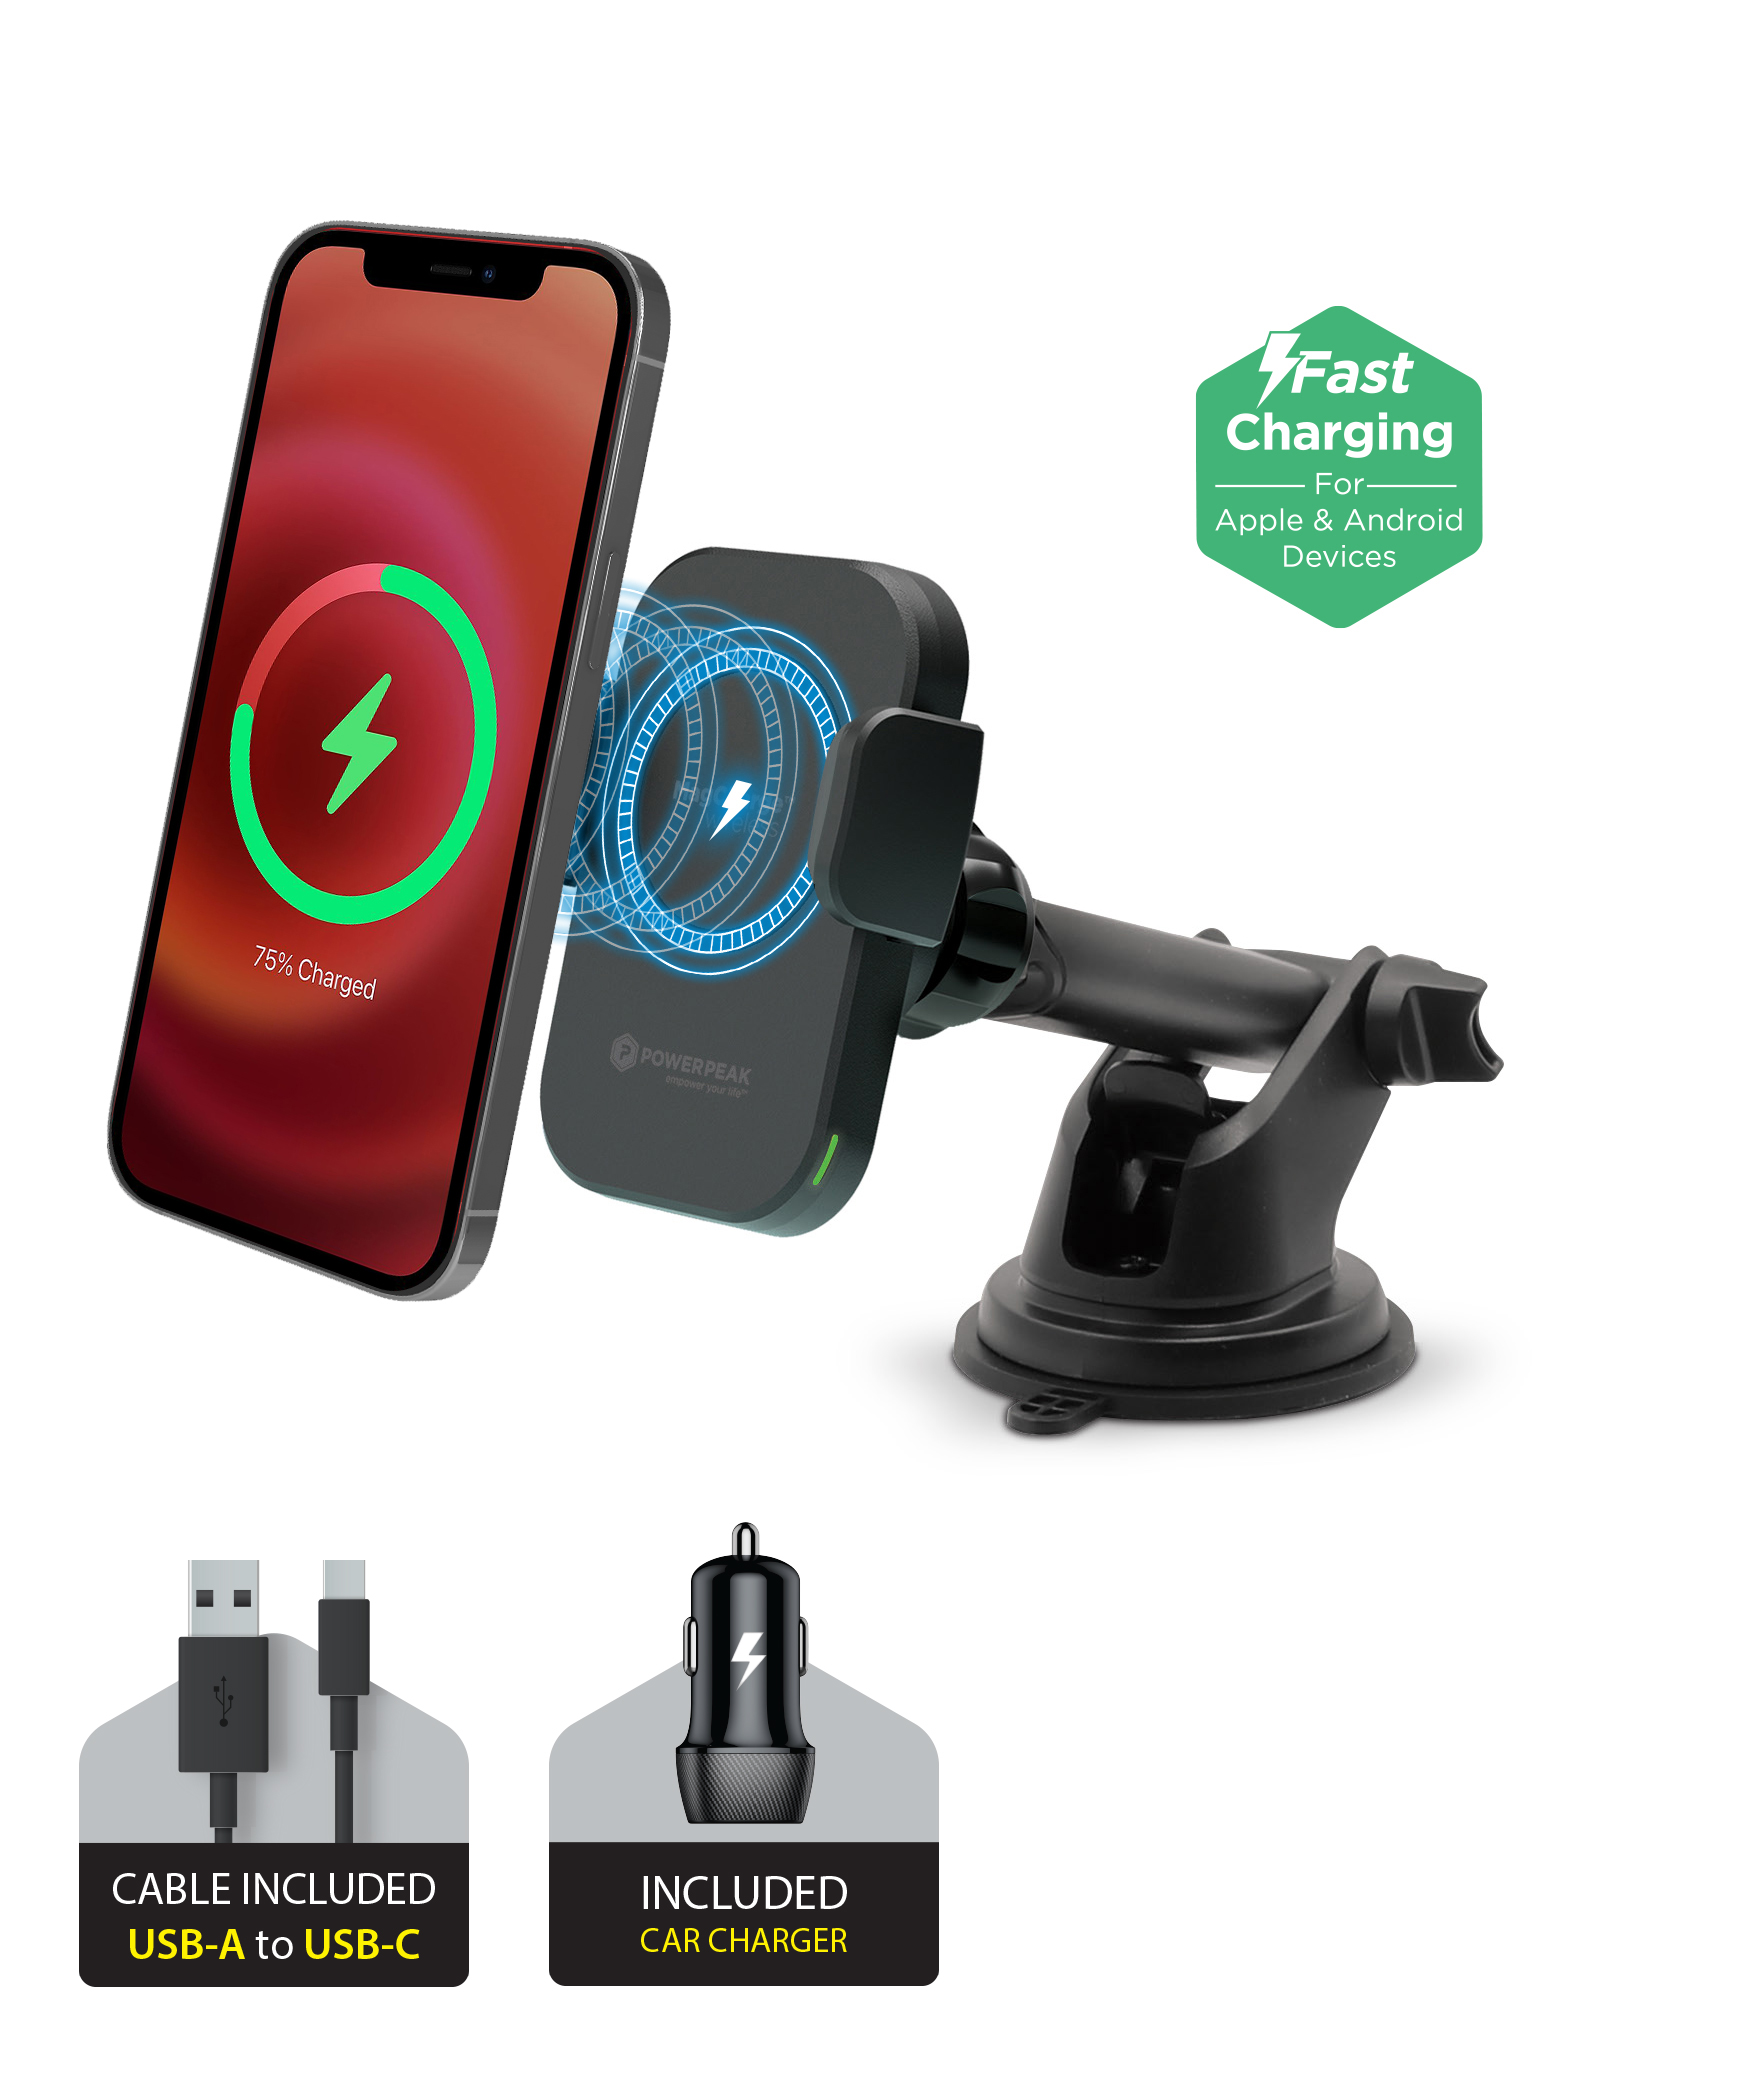 Black Magnetic Magcharge wireless charging Car Dash/Vent Mount Holder with Magnetic Auto-Alignment. Included car charger and cable USB-A to USB-C